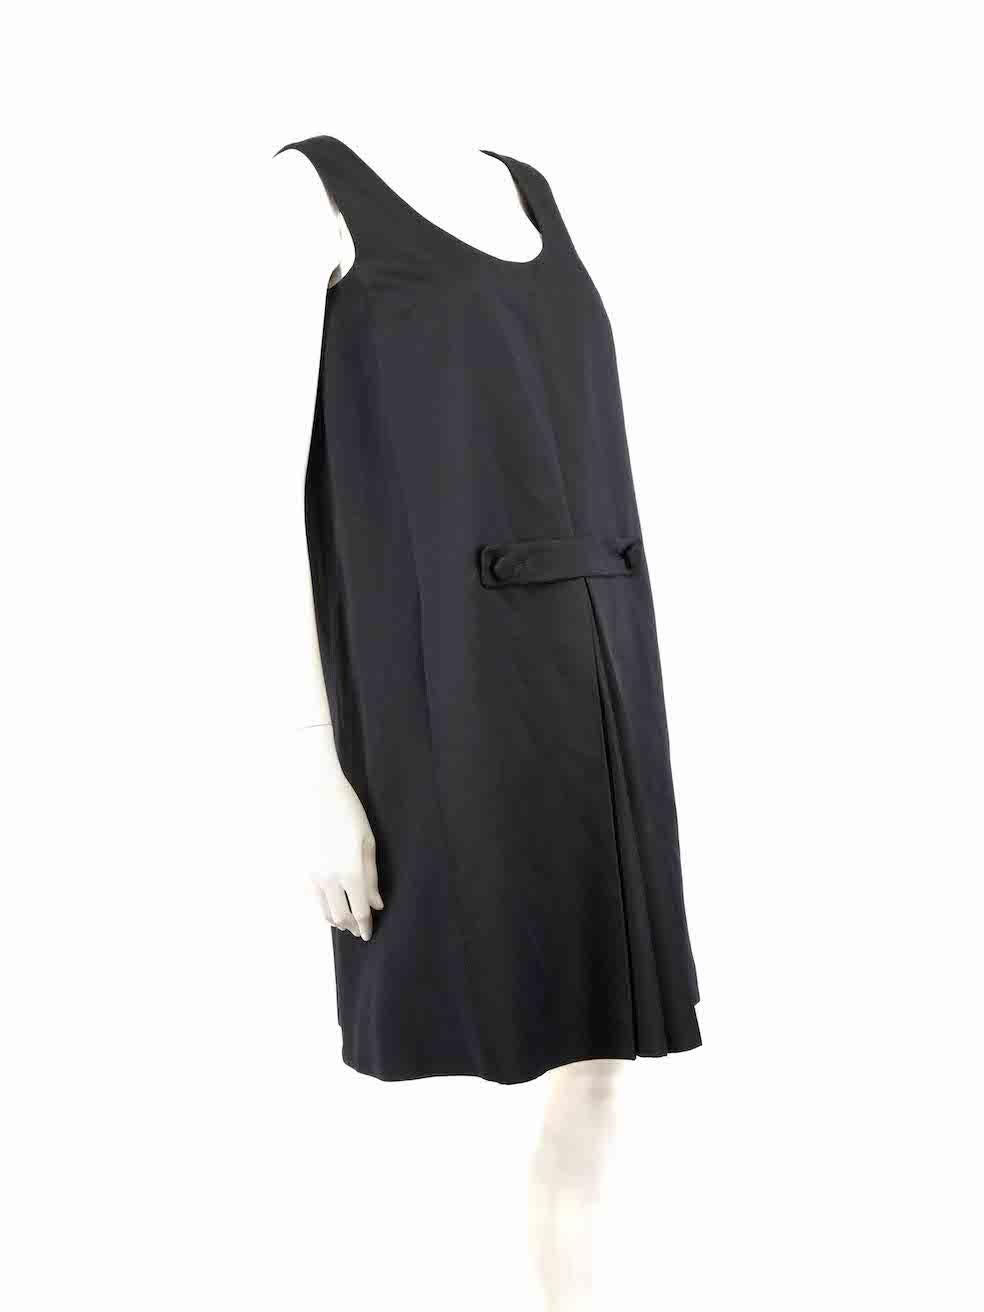 CONDITION is Very good. Minimal wear to dress is evident. Minimal wear to the front bottom is seen with some discolouration marks on this used Prada designer resale item.
 
 
 
 Details
 
 
 Navy
 
 Wool
 
 Dress
 
 Sleeveless
 
 Knee length
 
